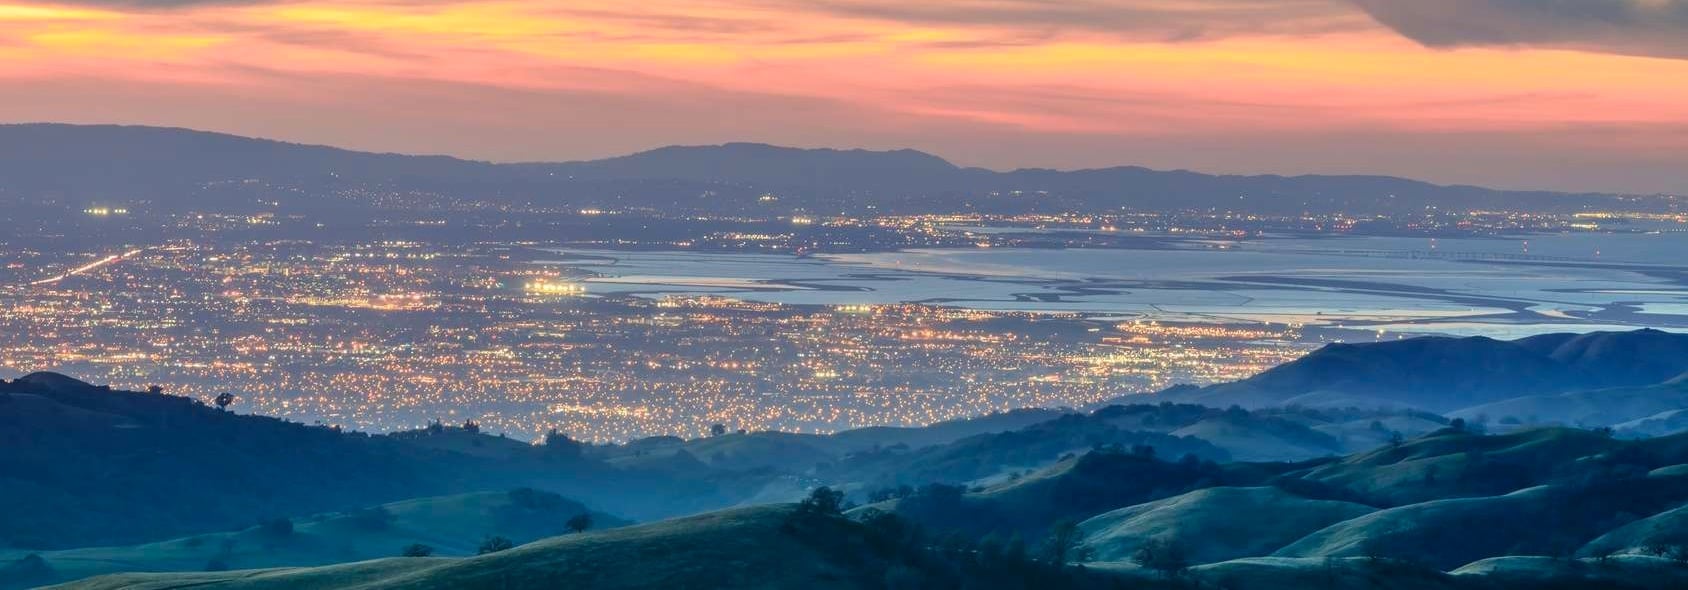 Silicon Valley at Sunset